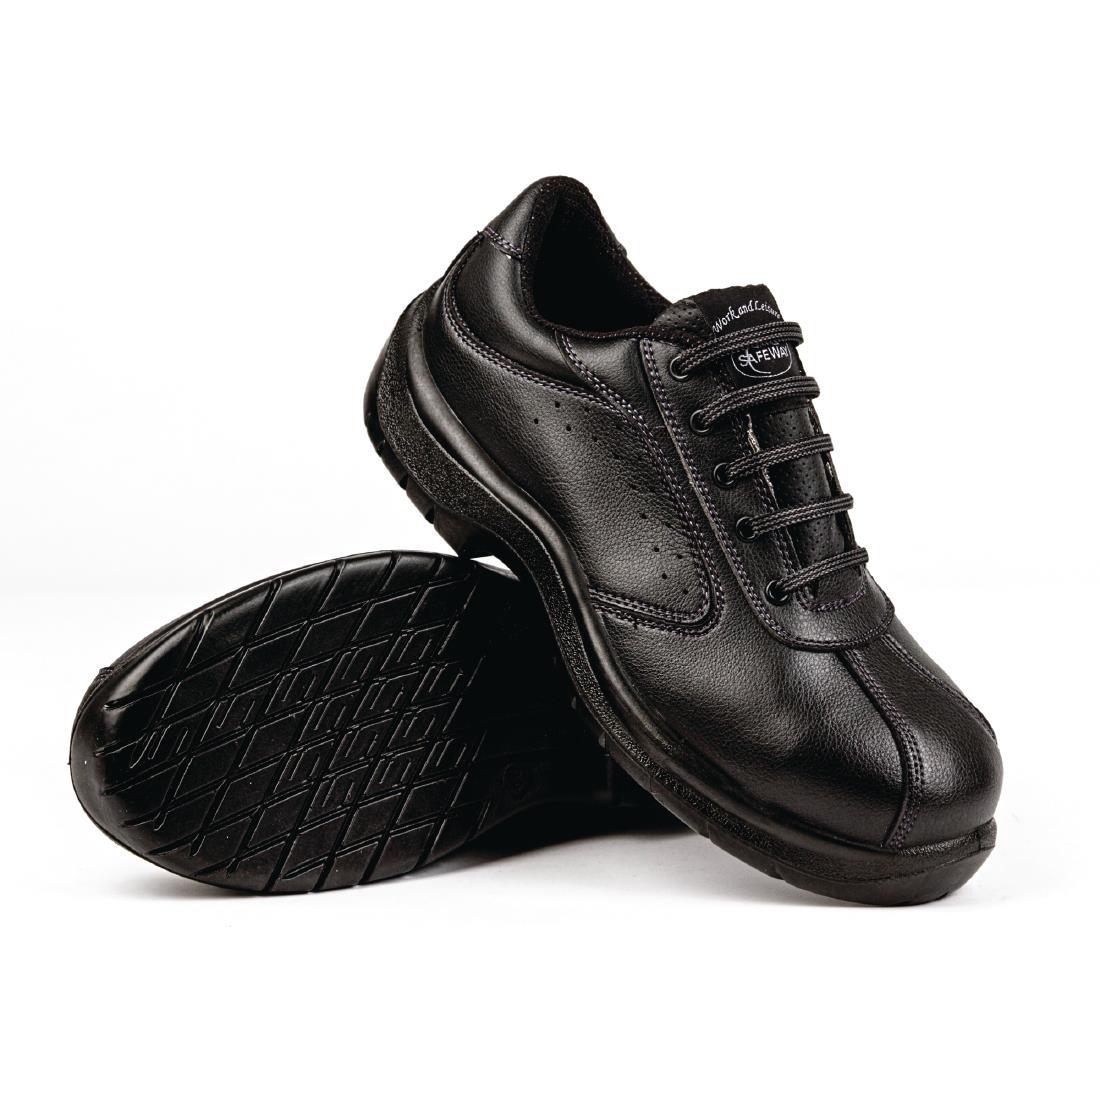 Slipbuster Side Perforated Lace Up Black 39